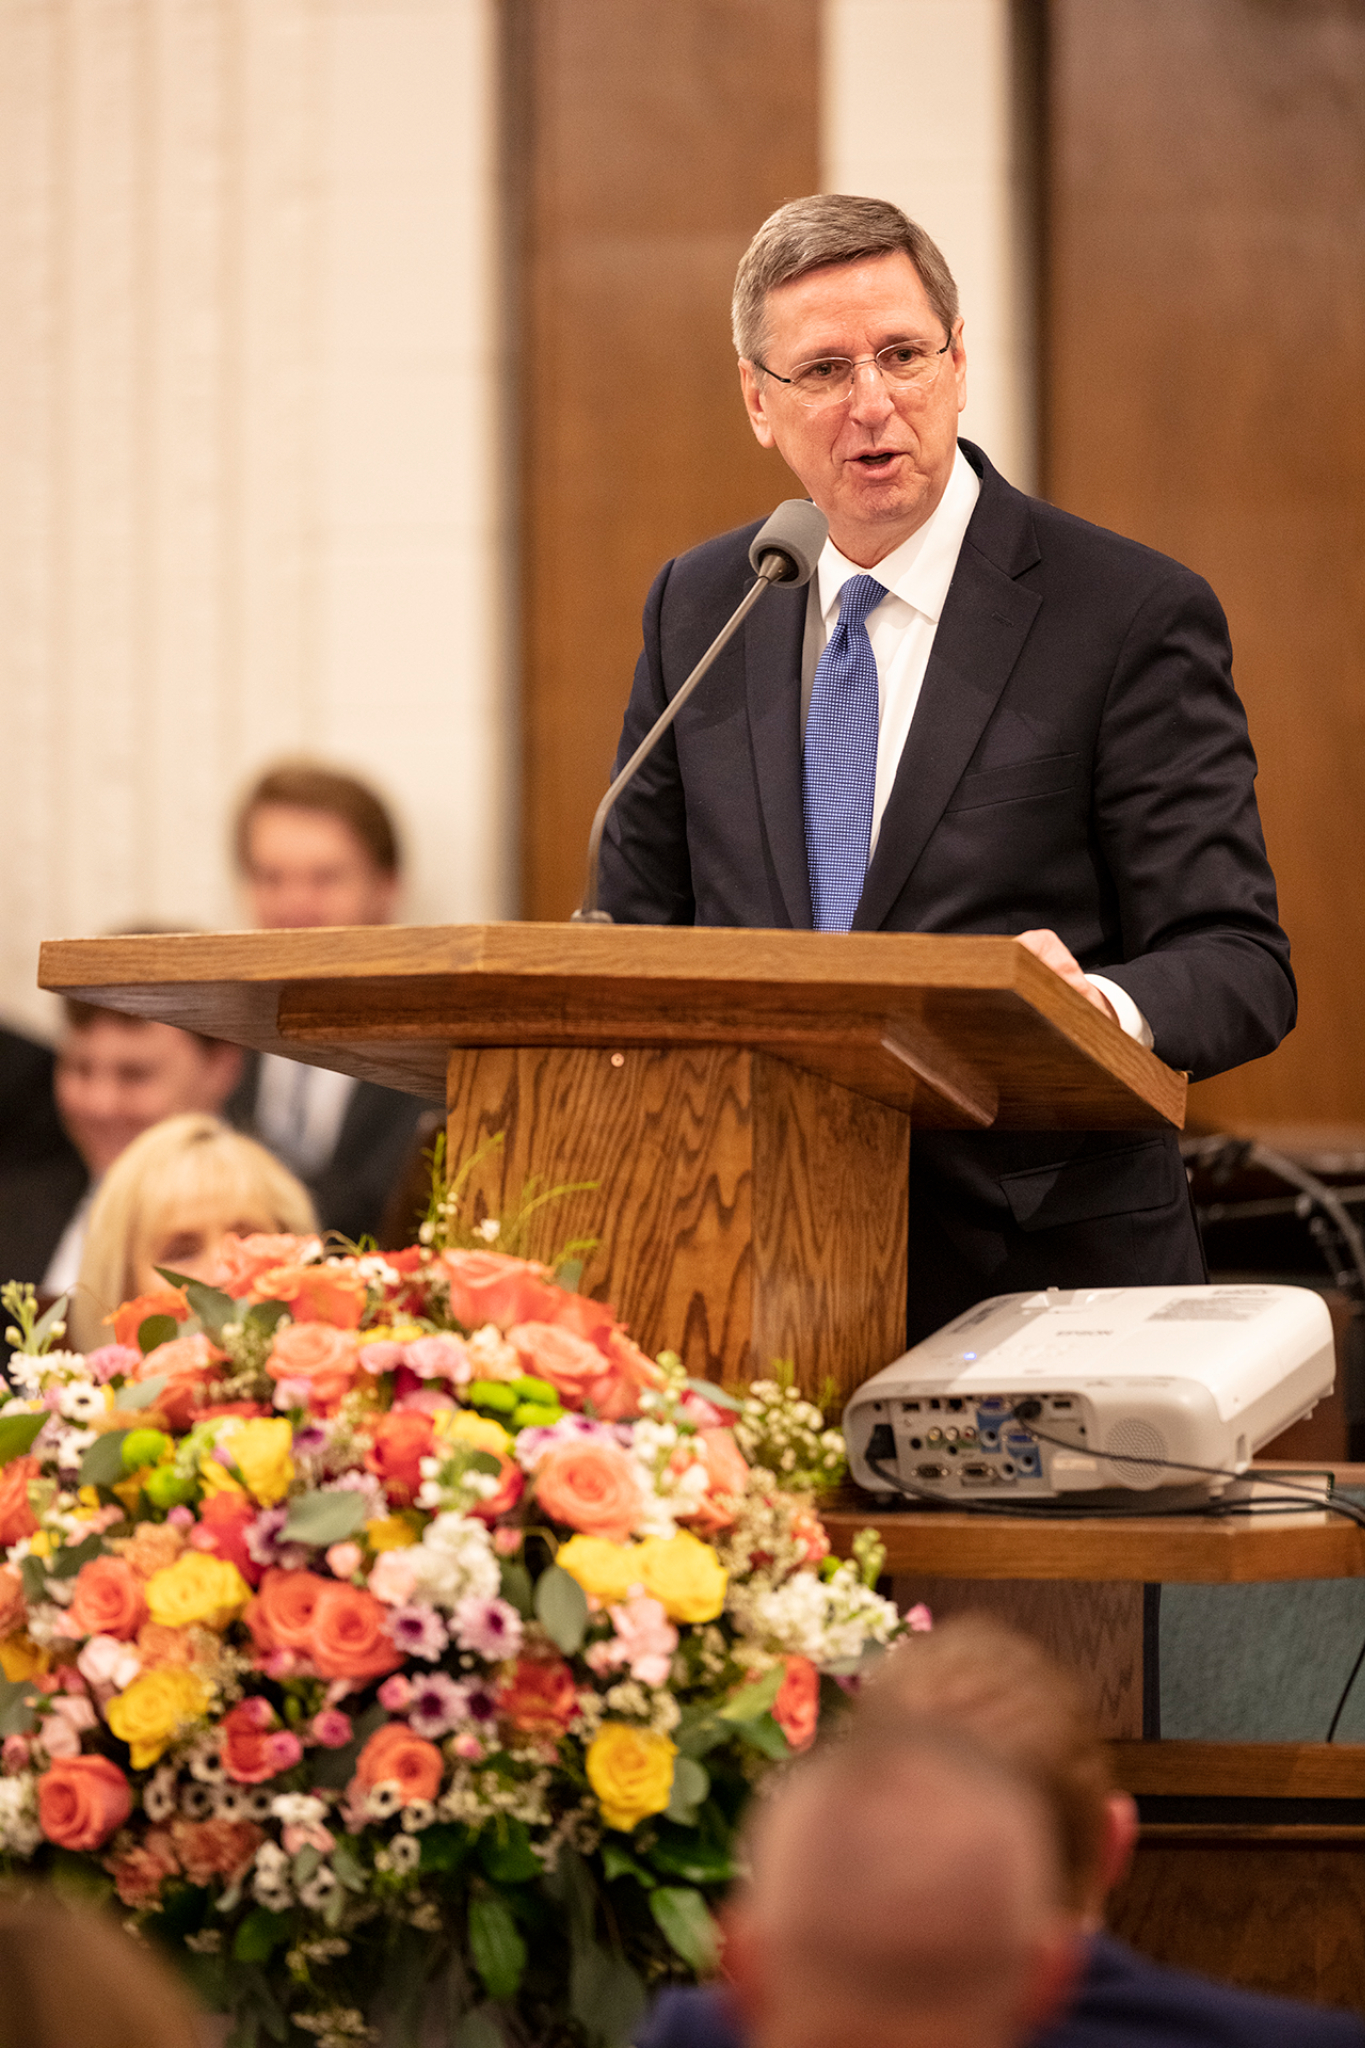 A man wearing a suit and tie and speaking from a pulpit inside.